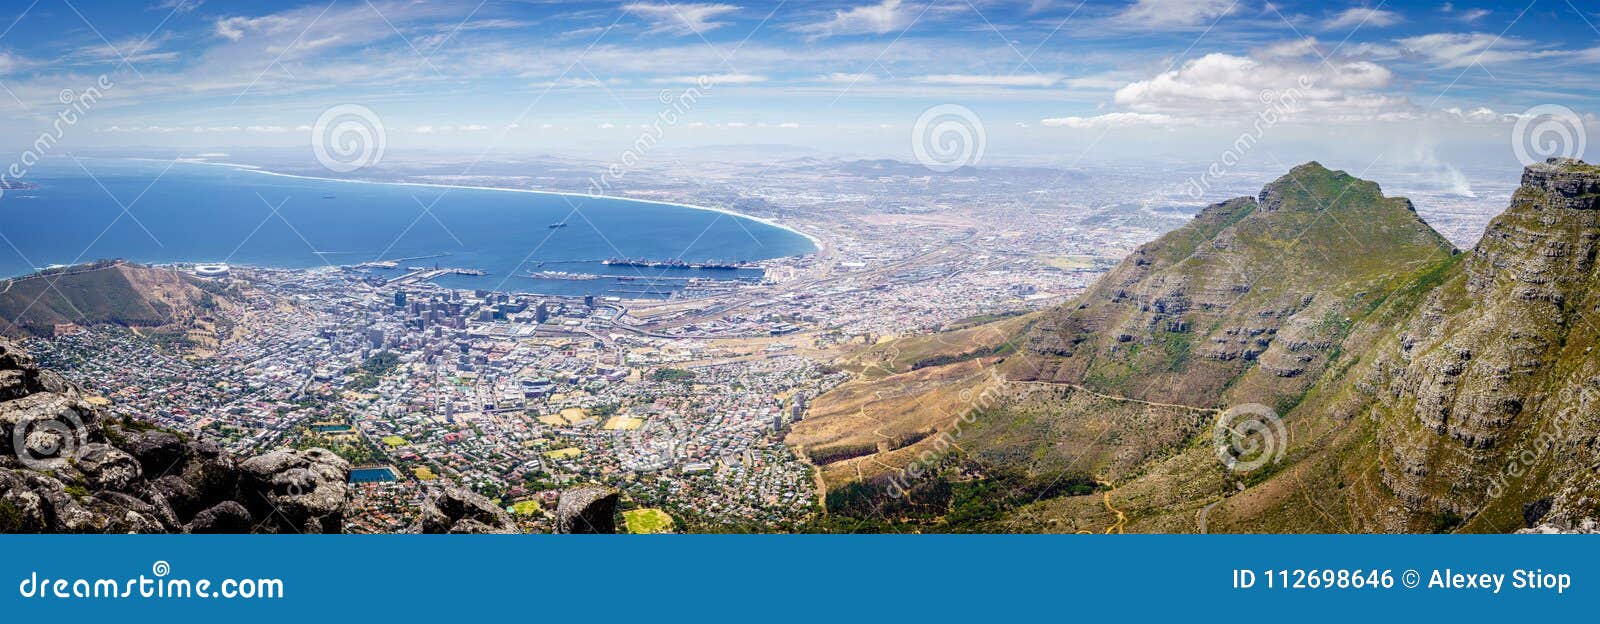 cape town panorama, south africa